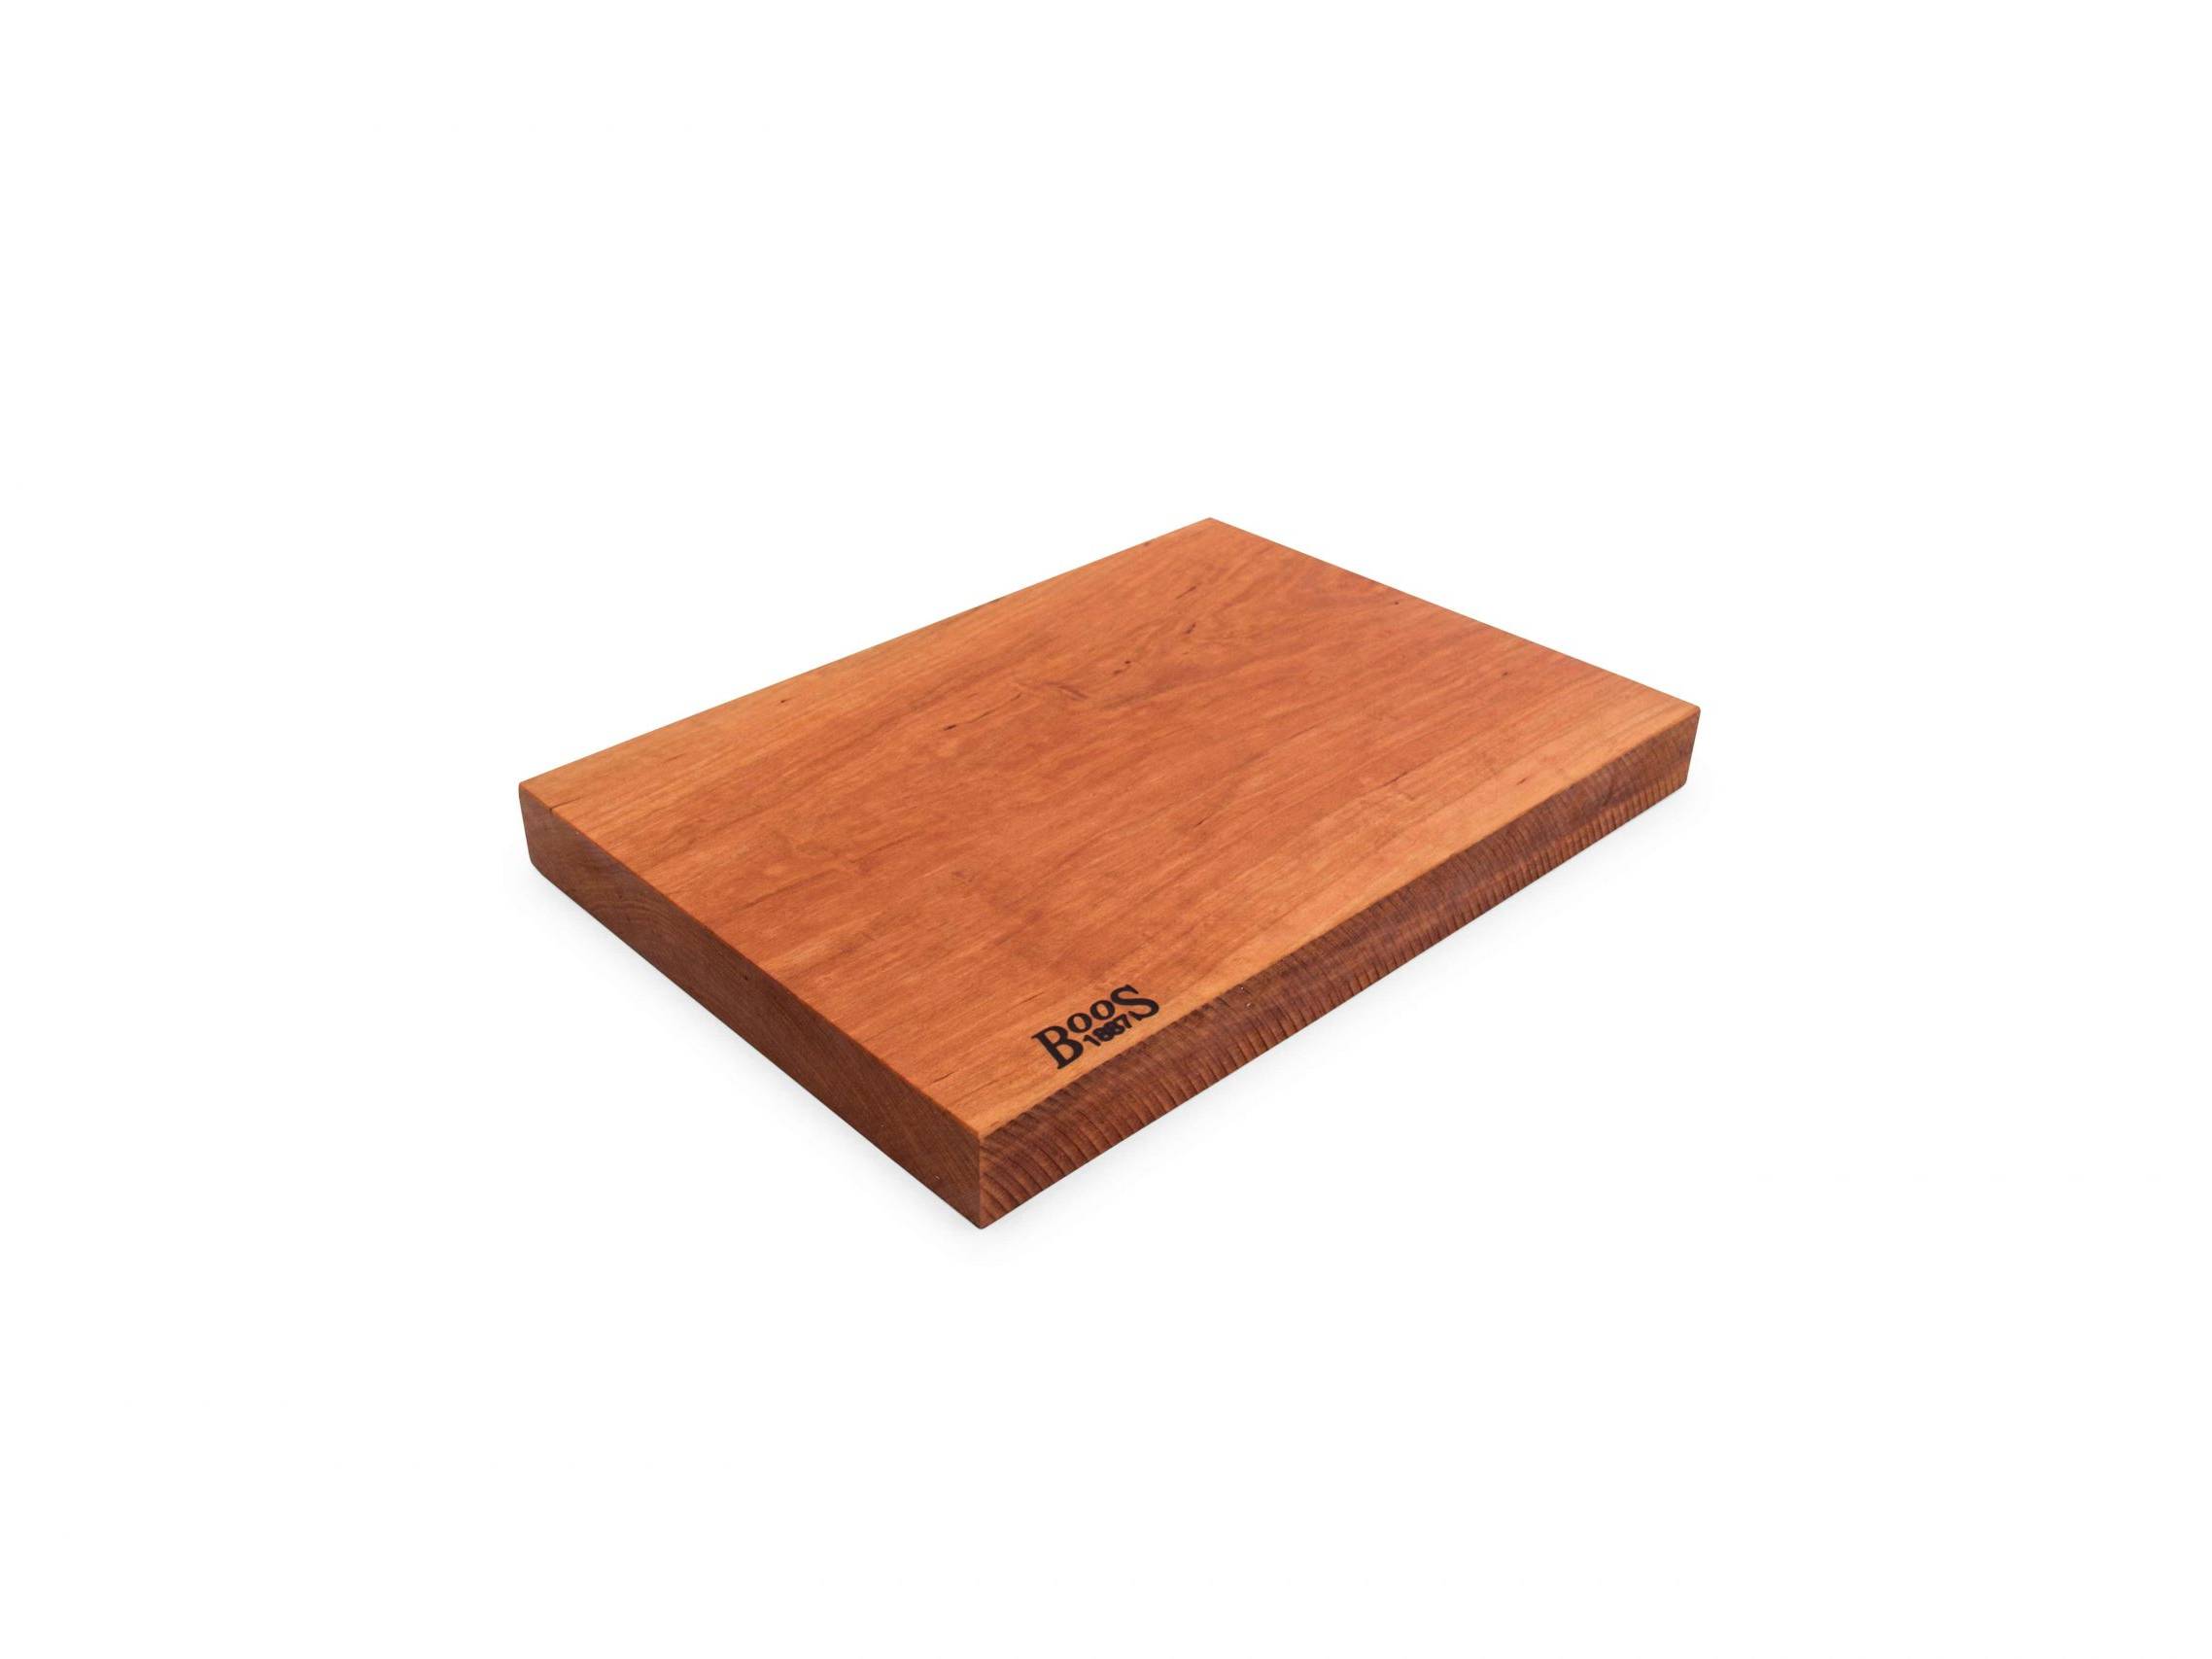 Boos 1887 / Rustic Edge one piece cutting board; American Cherry; can be used on both sides 41